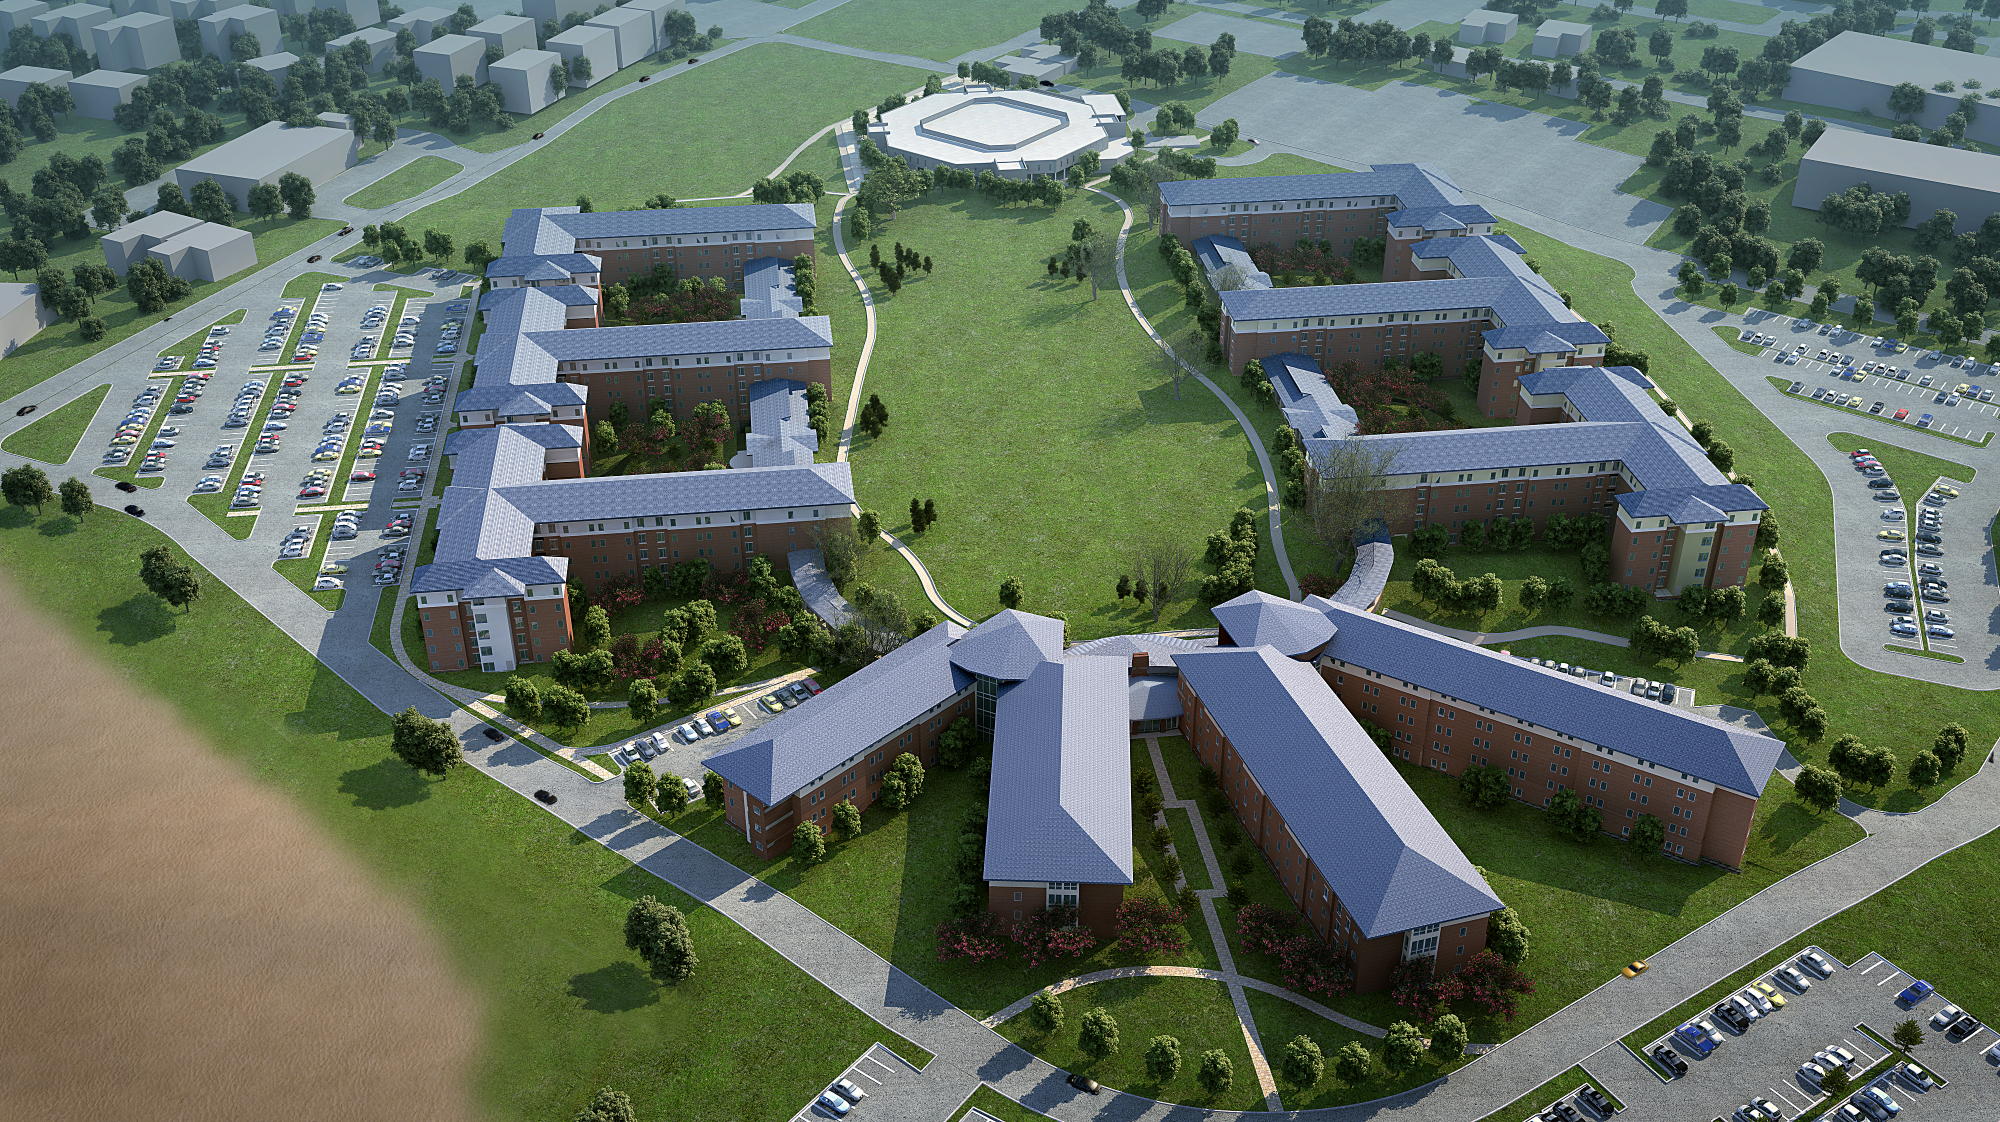 The Millersville University housing, which will be designed in phases, will repl